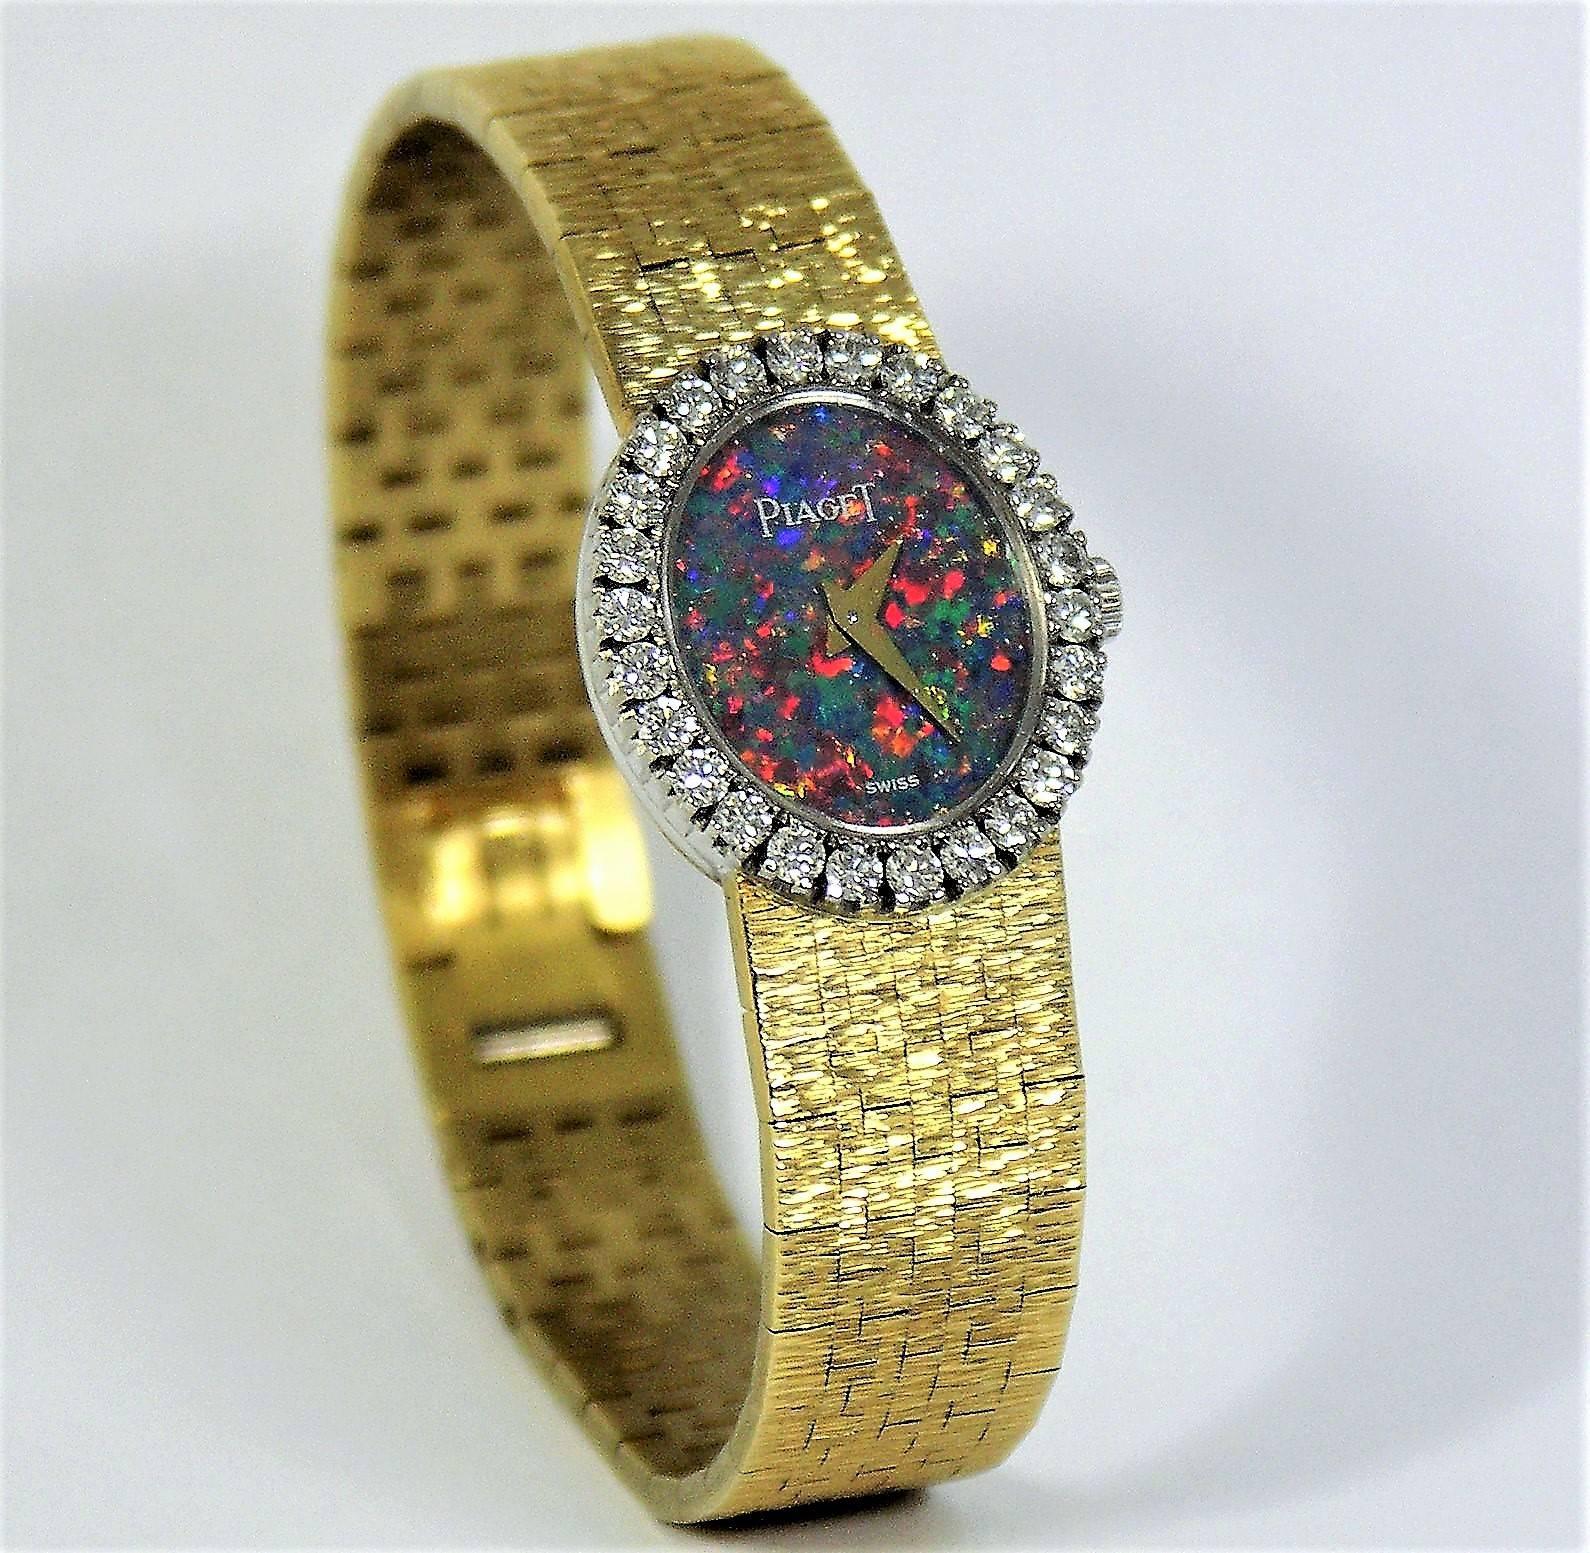 This lovely  petite size Piaget, has a vertical, opal dial surrounded by
26 round brilliant cut diamonds weighing an approximate total of 1.20ct.
The outside measurements of the watch head including the diamond bezel 
are 19mm x 24mm. The18k yellow